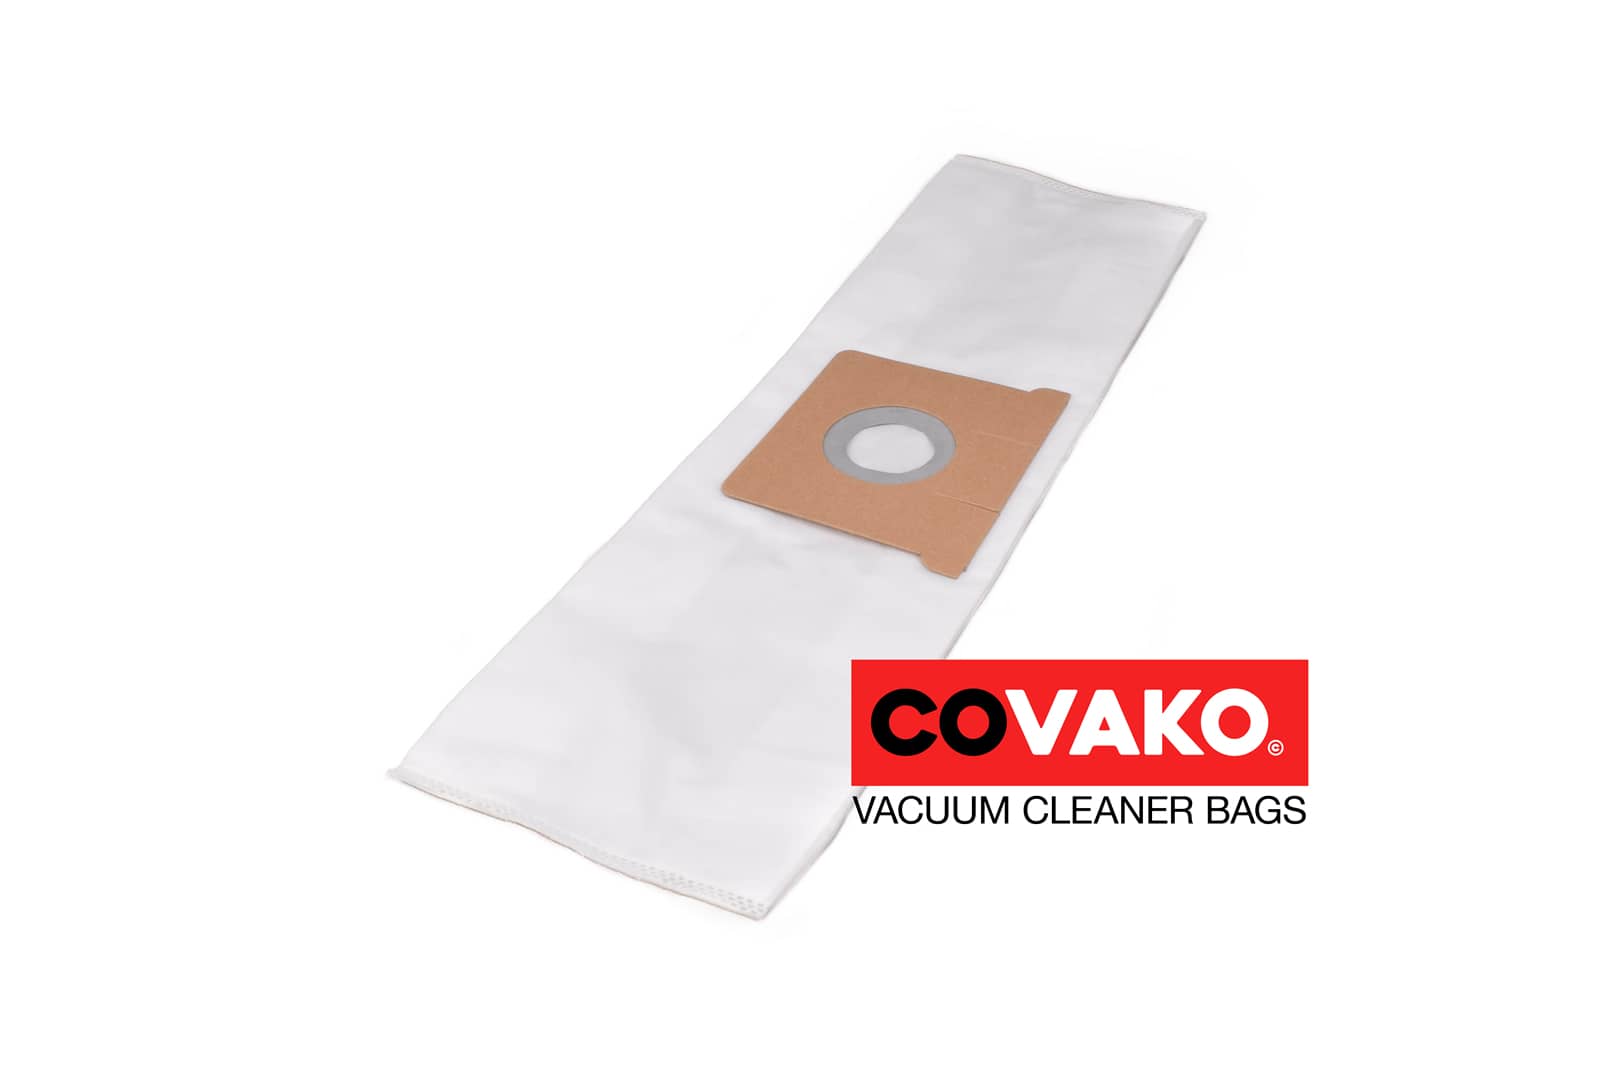 Gansow LP 1/16 ECO B / Synthesis - Gansow vacuum cleaner bags